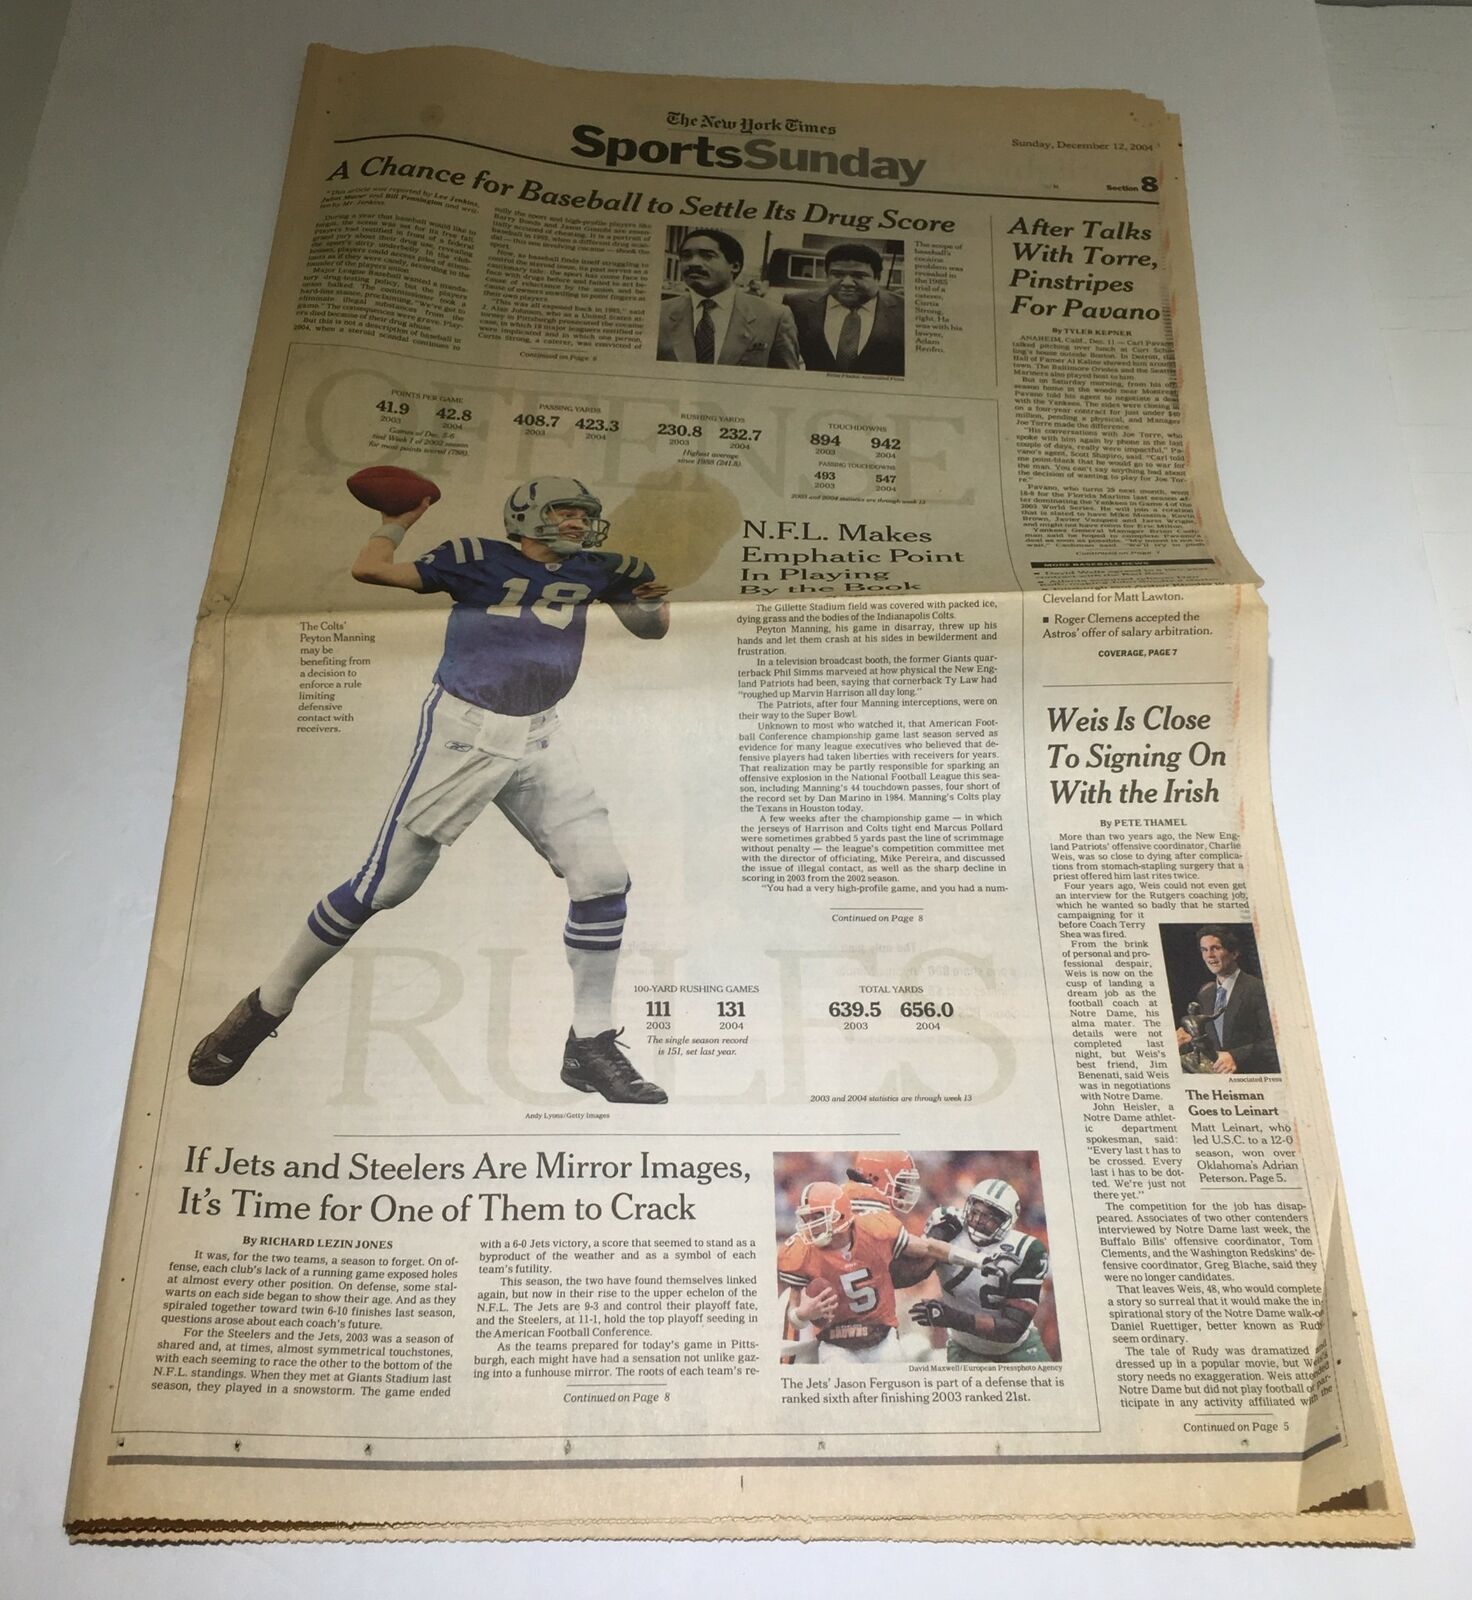 The NY Times: Dec 12 2004 NFL Makes Emphatic Point In Playing By the Book